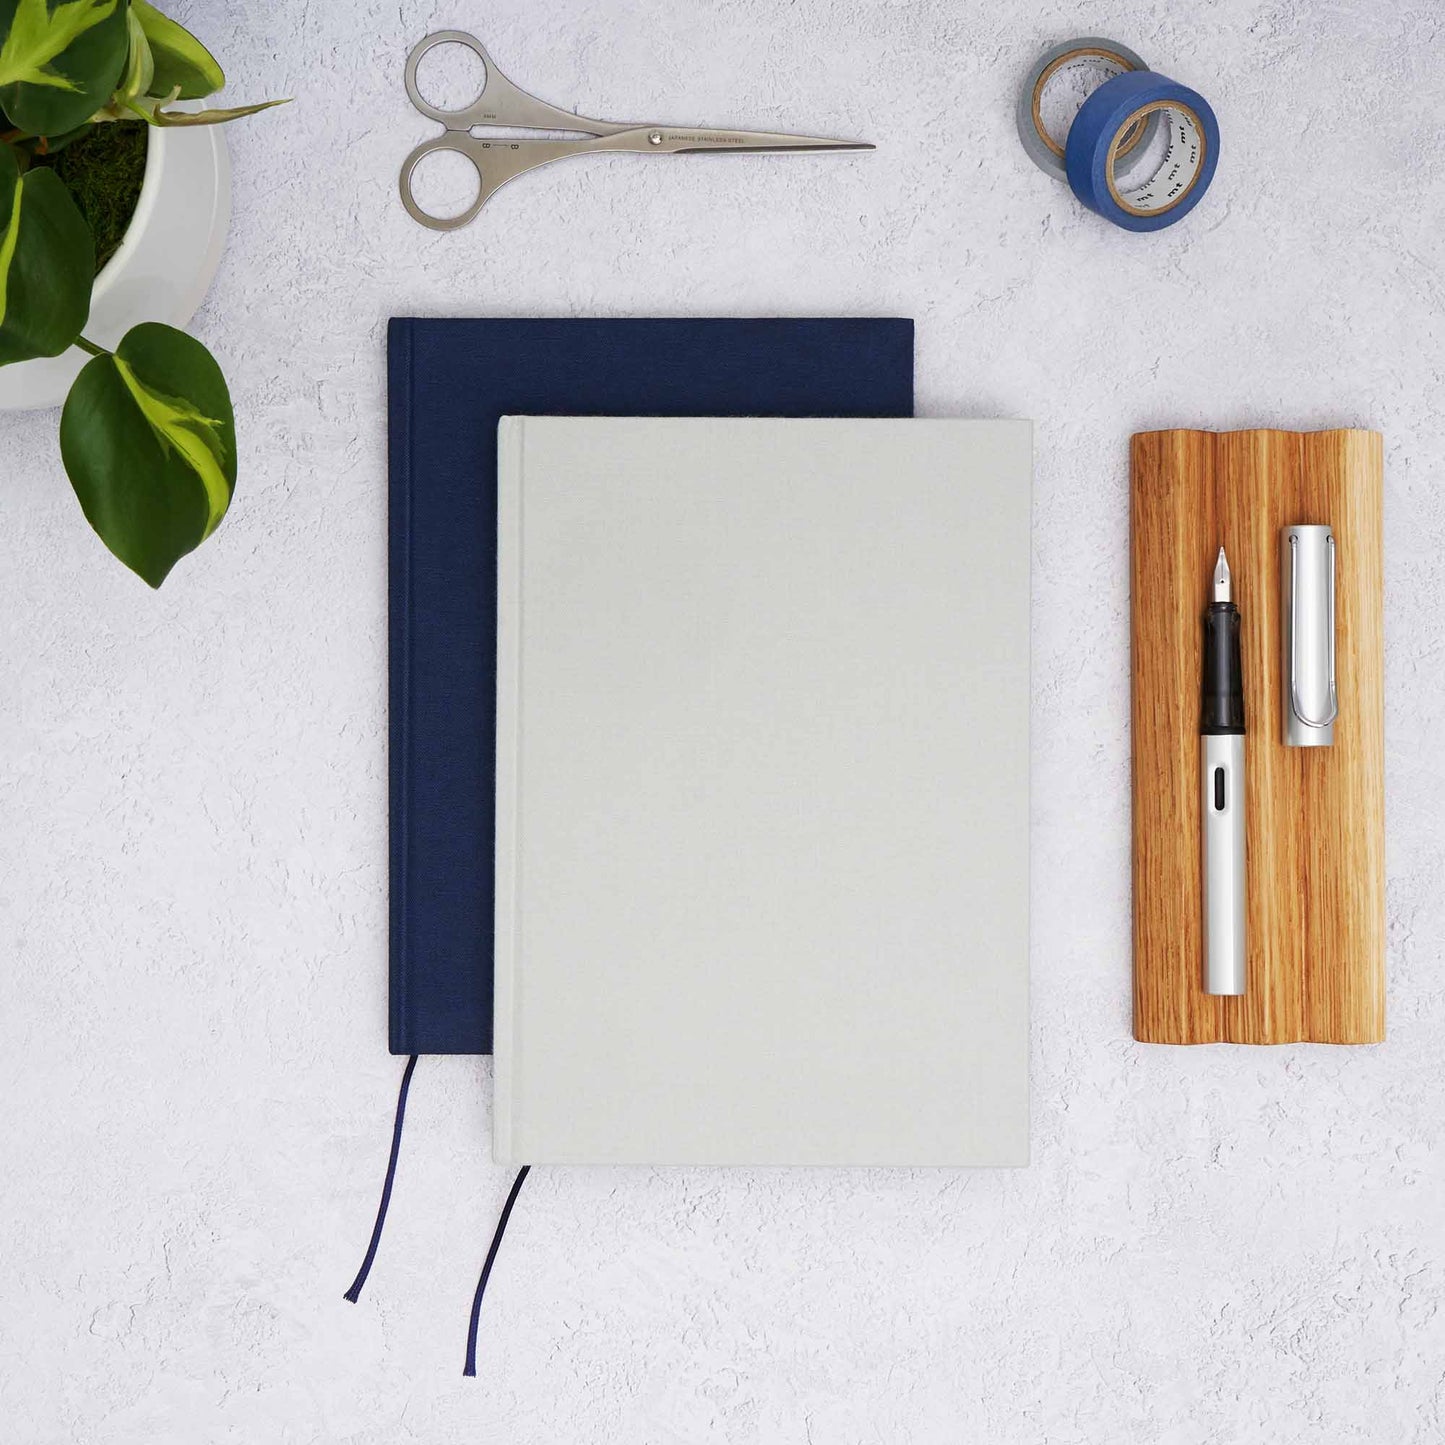 The Paper Mind Passepied Cream Hardcover Notebooks in grey and blue with an oak wood pen tray, Lamy AL Star fountain Pen, MT washi tape, Before Breakfast London scissors and plant.